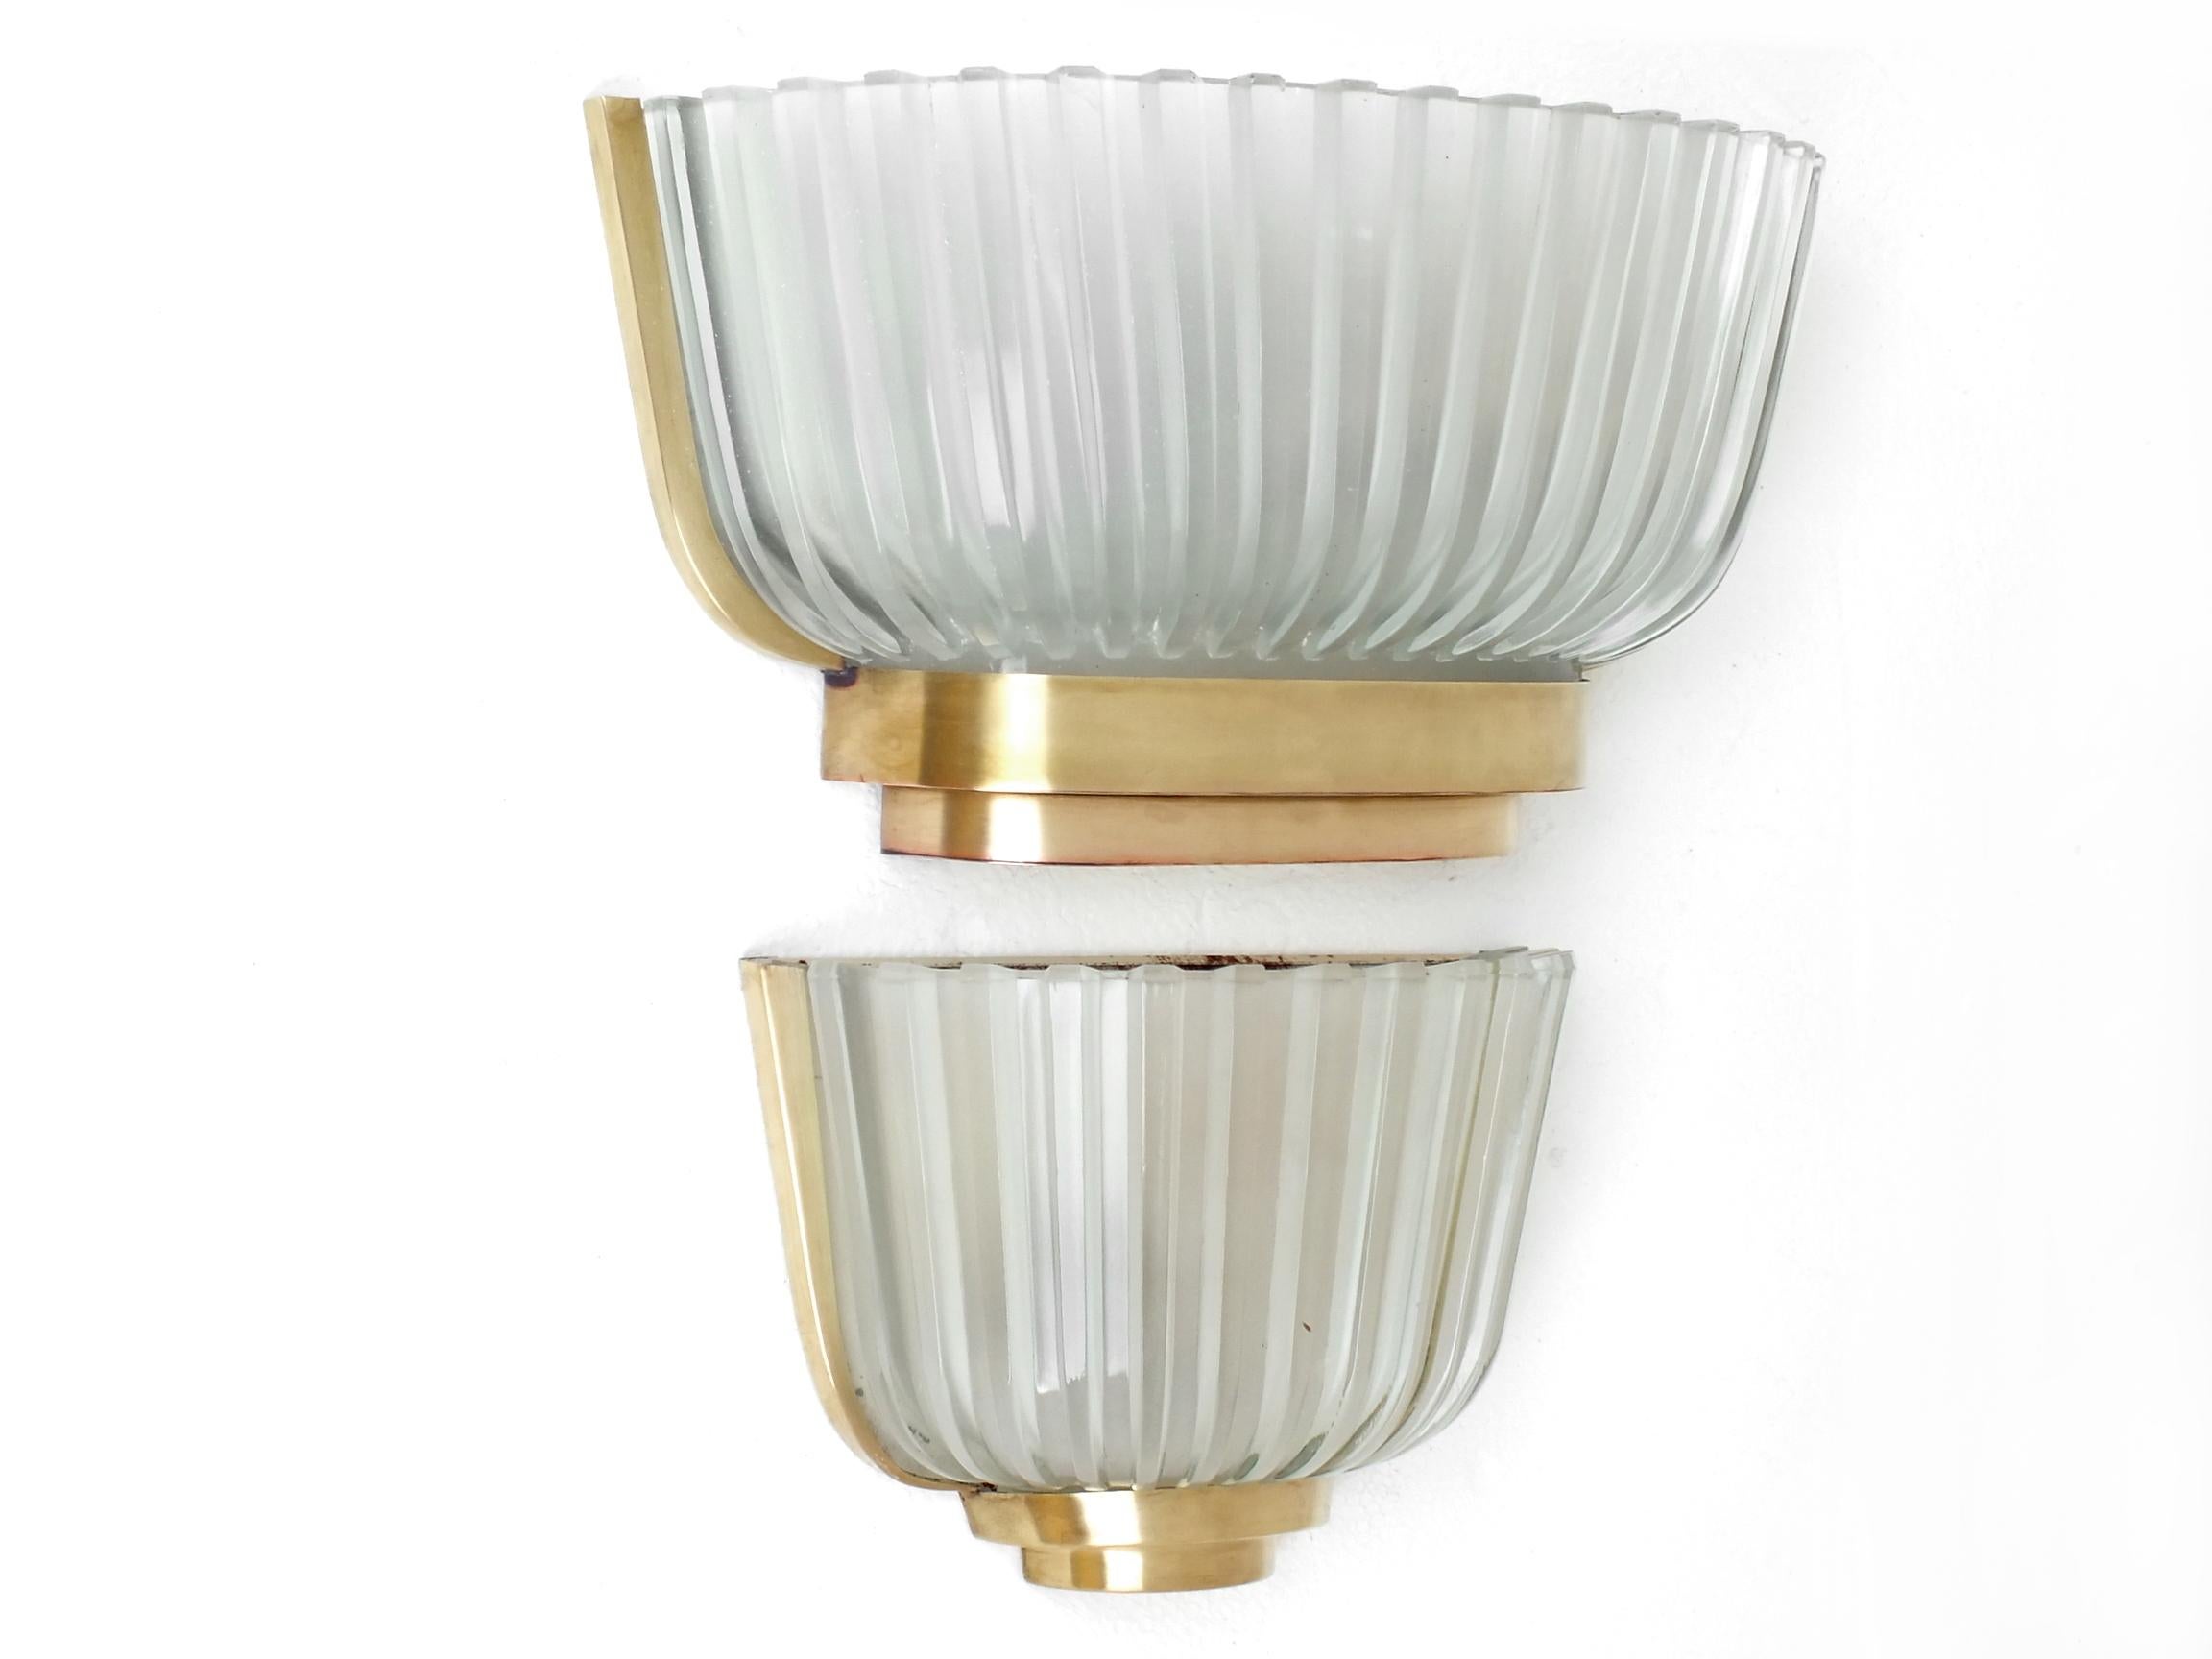 Archimede Seguso two wall lamp crystal pressed and brass, design years '35 / '40.

Two measure for this two wall lamps are; the smaller seguso measures 9